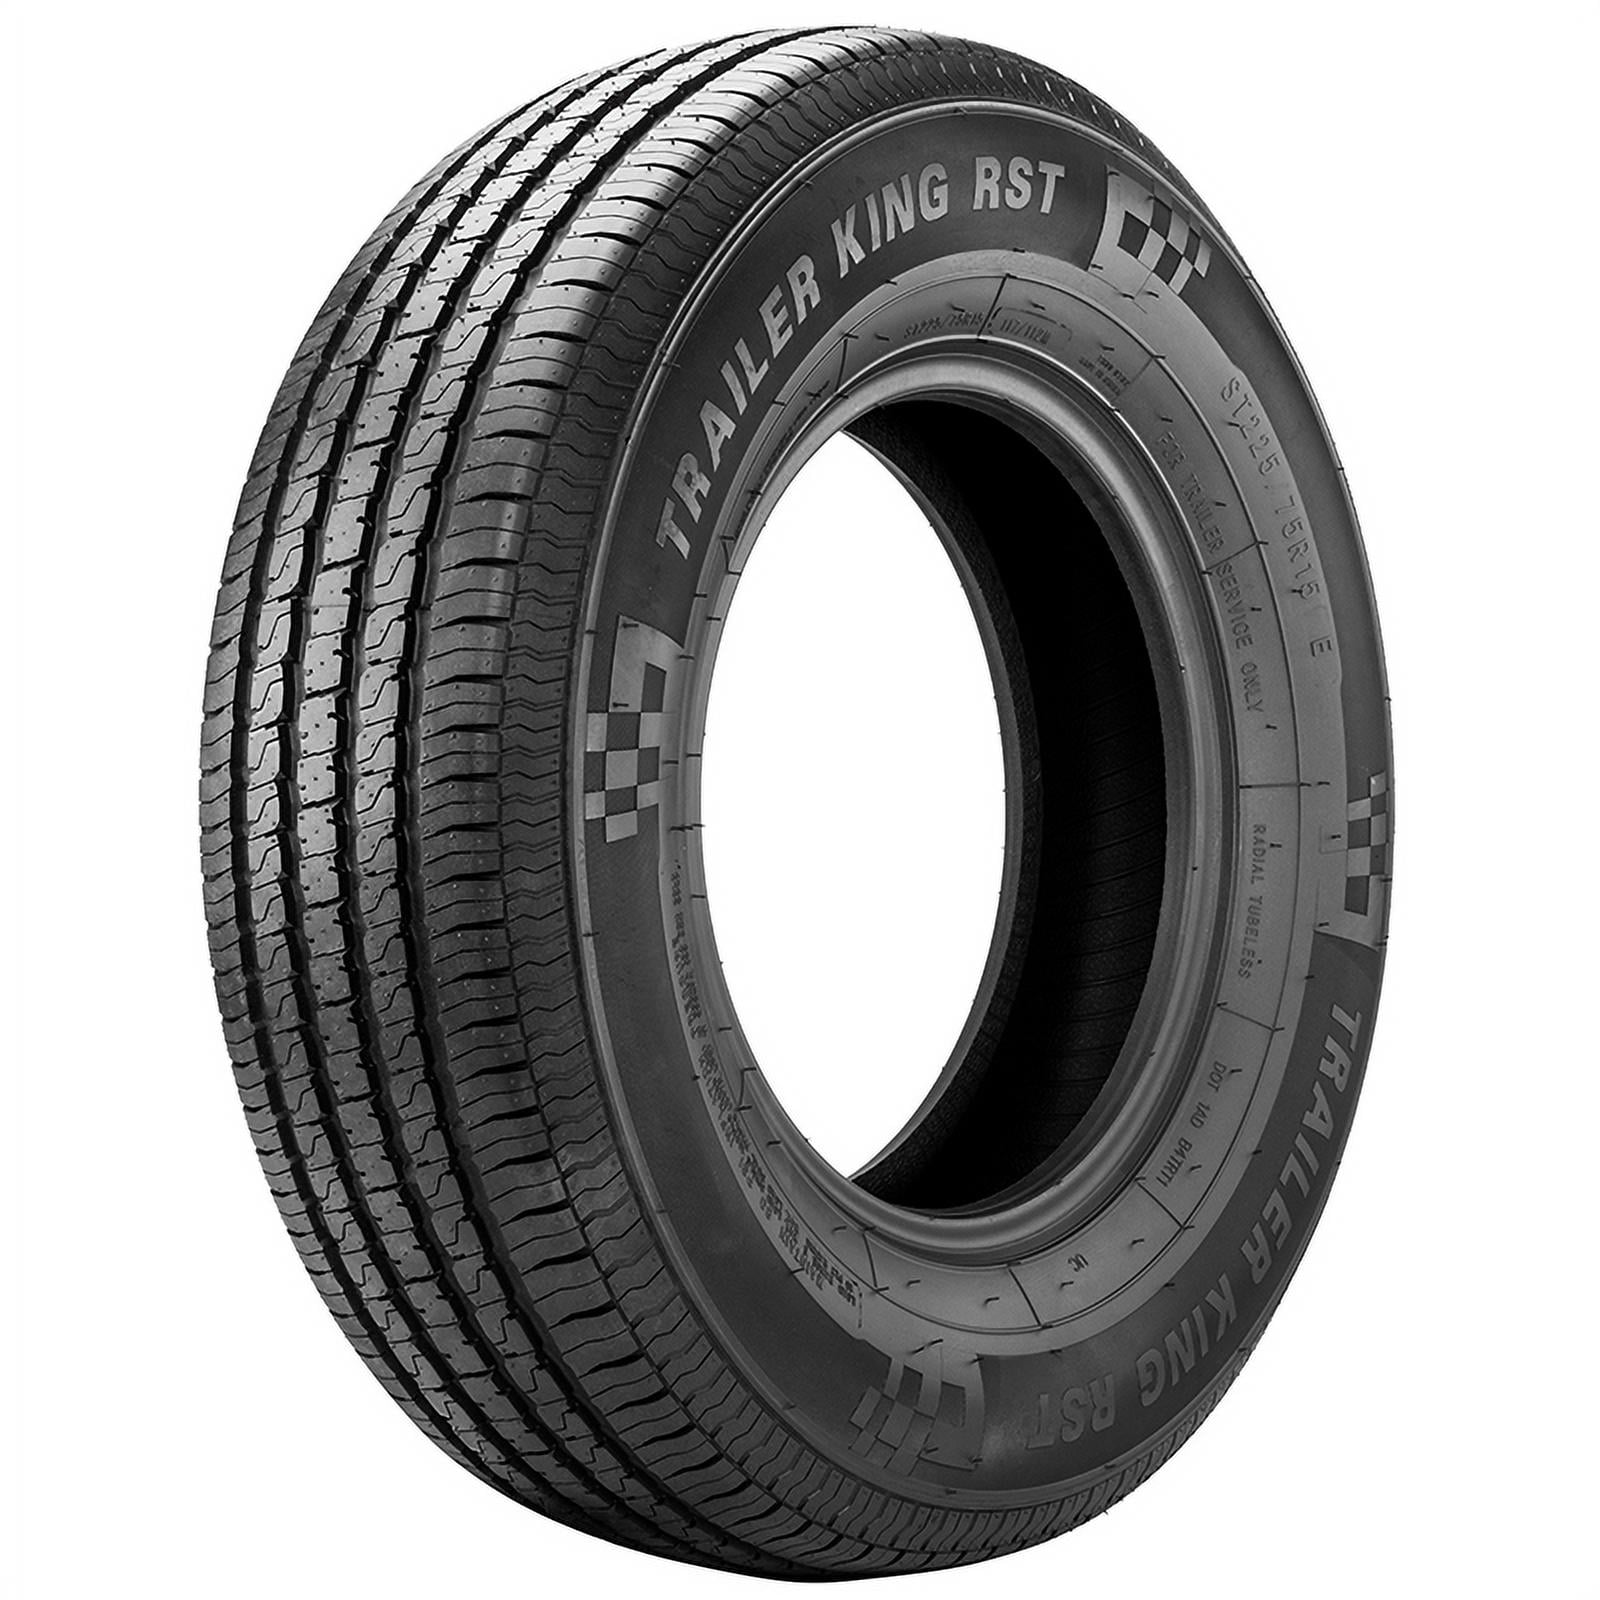 2 Tires Prometer Radial ST 225/75R15 Load E 10 Ply Trailer 